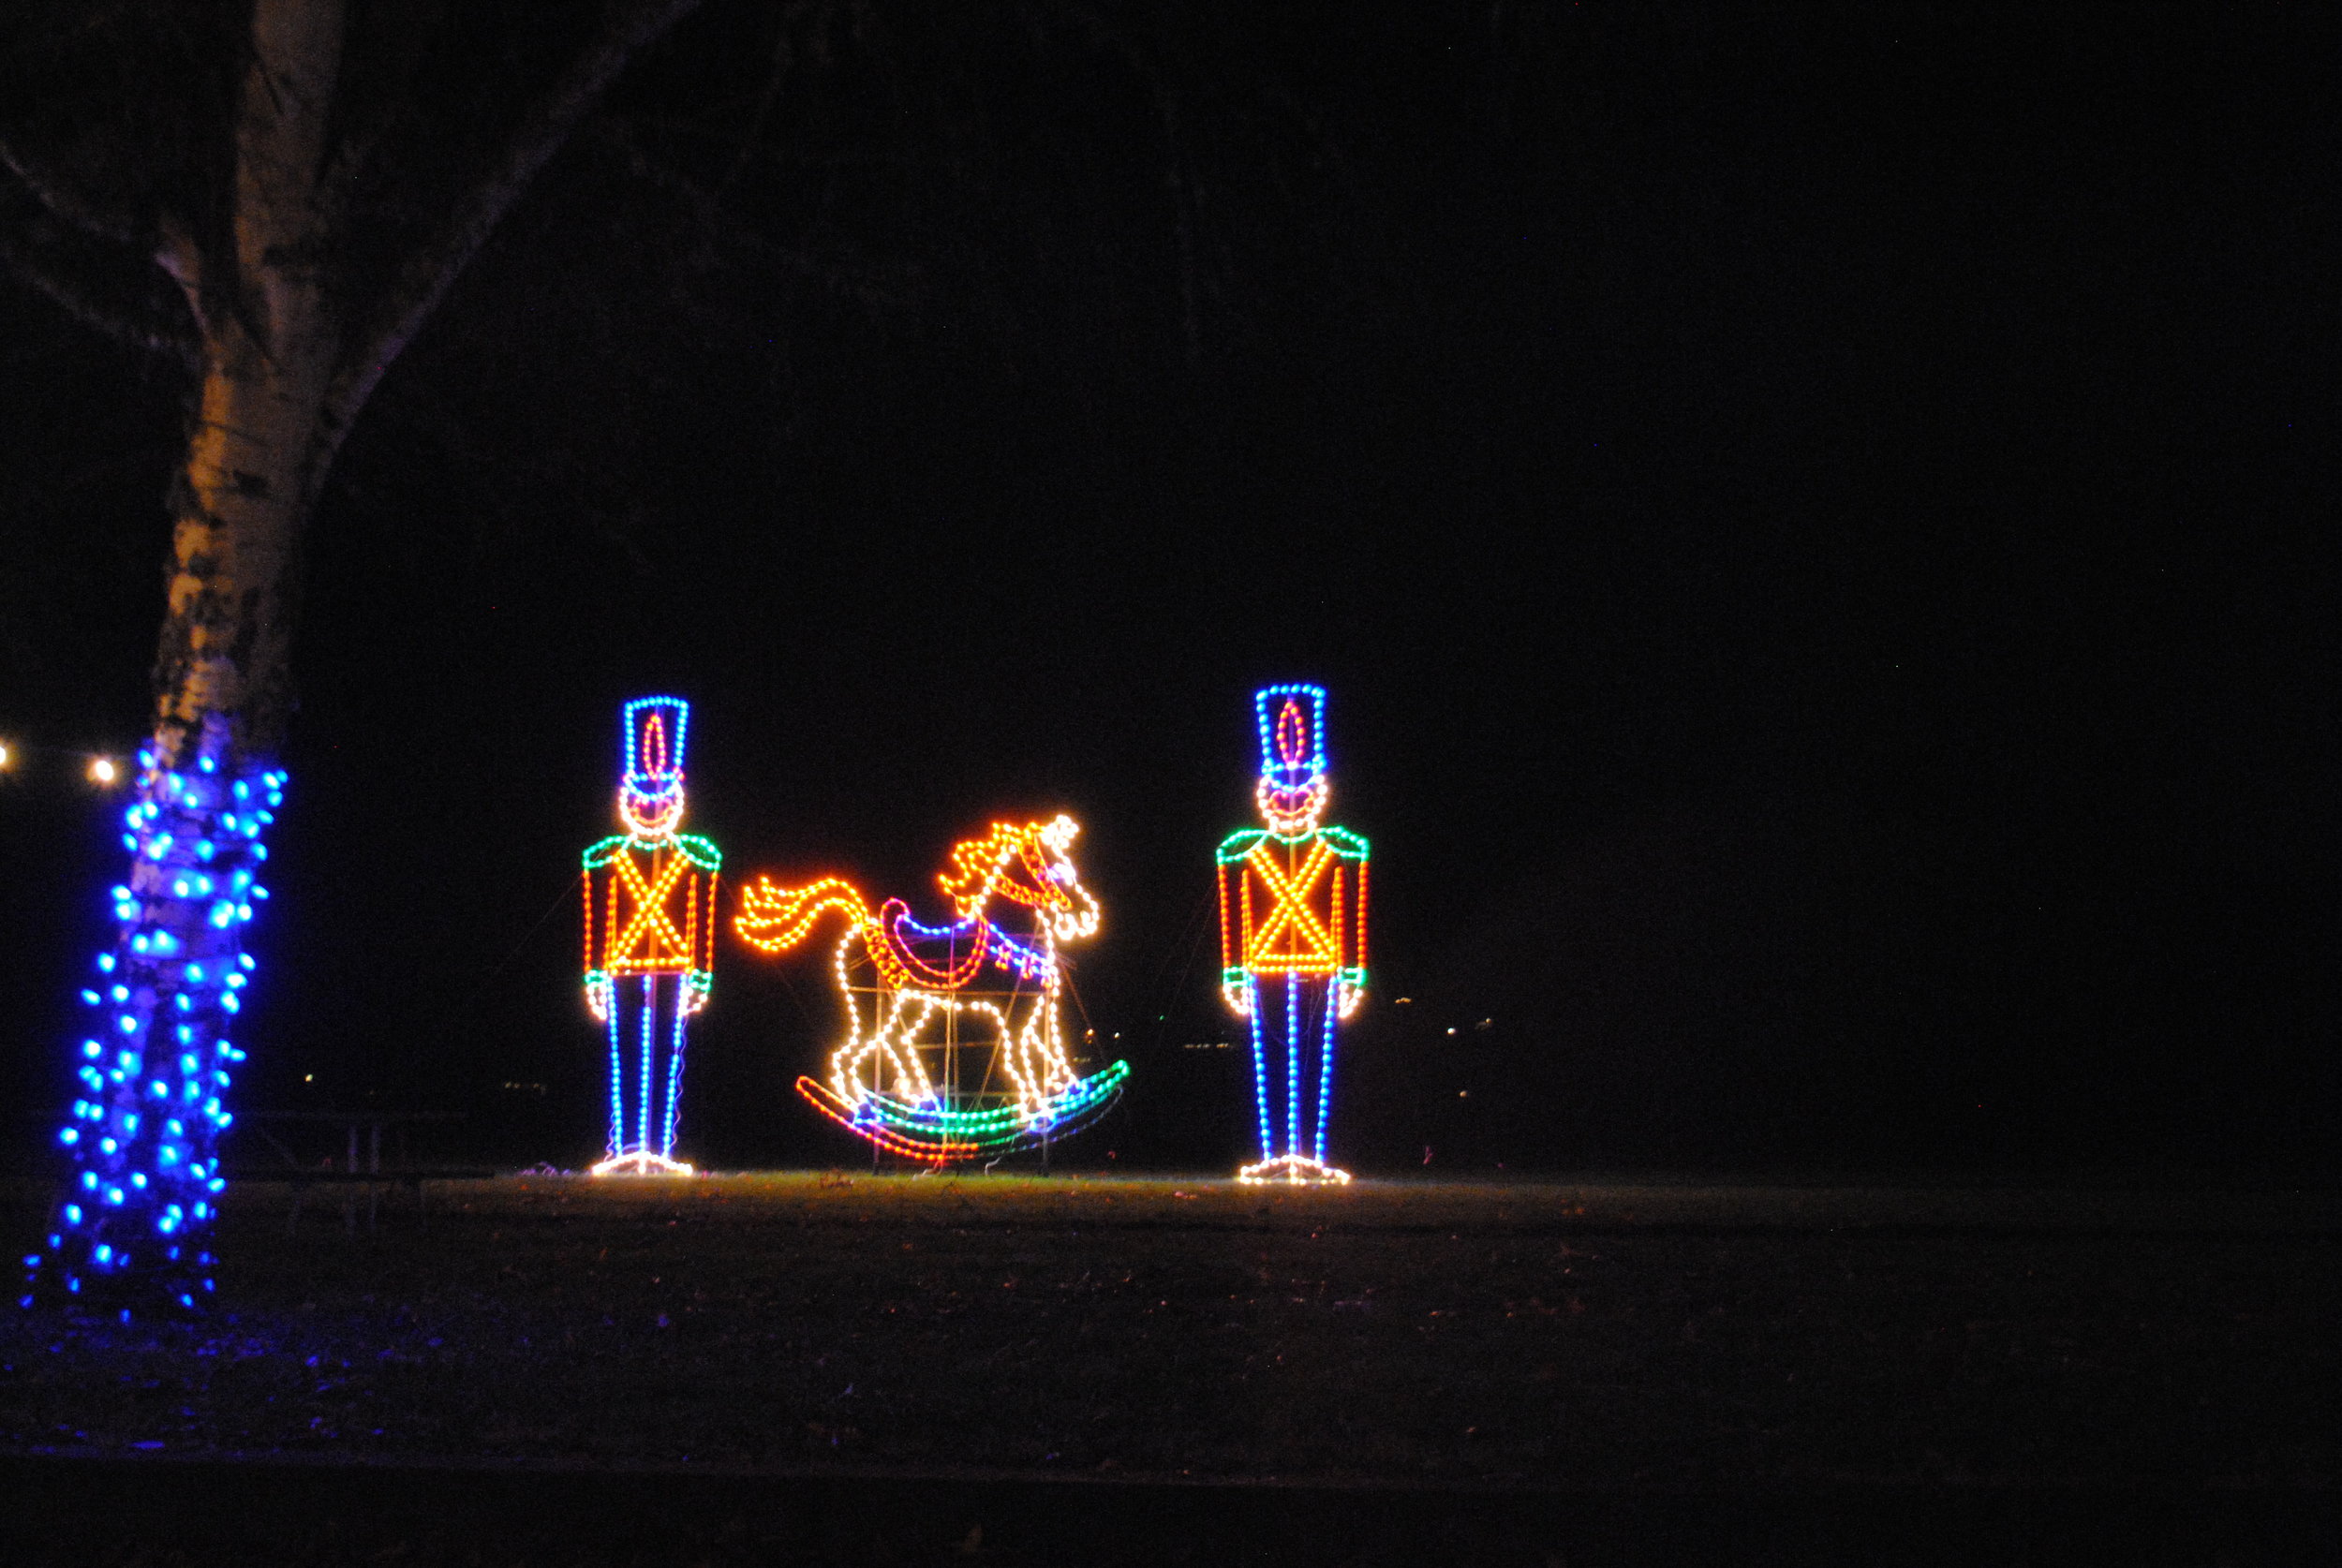 Umpqua Valley Festival of Lights - Roseburg - What to do in Southern Oregon